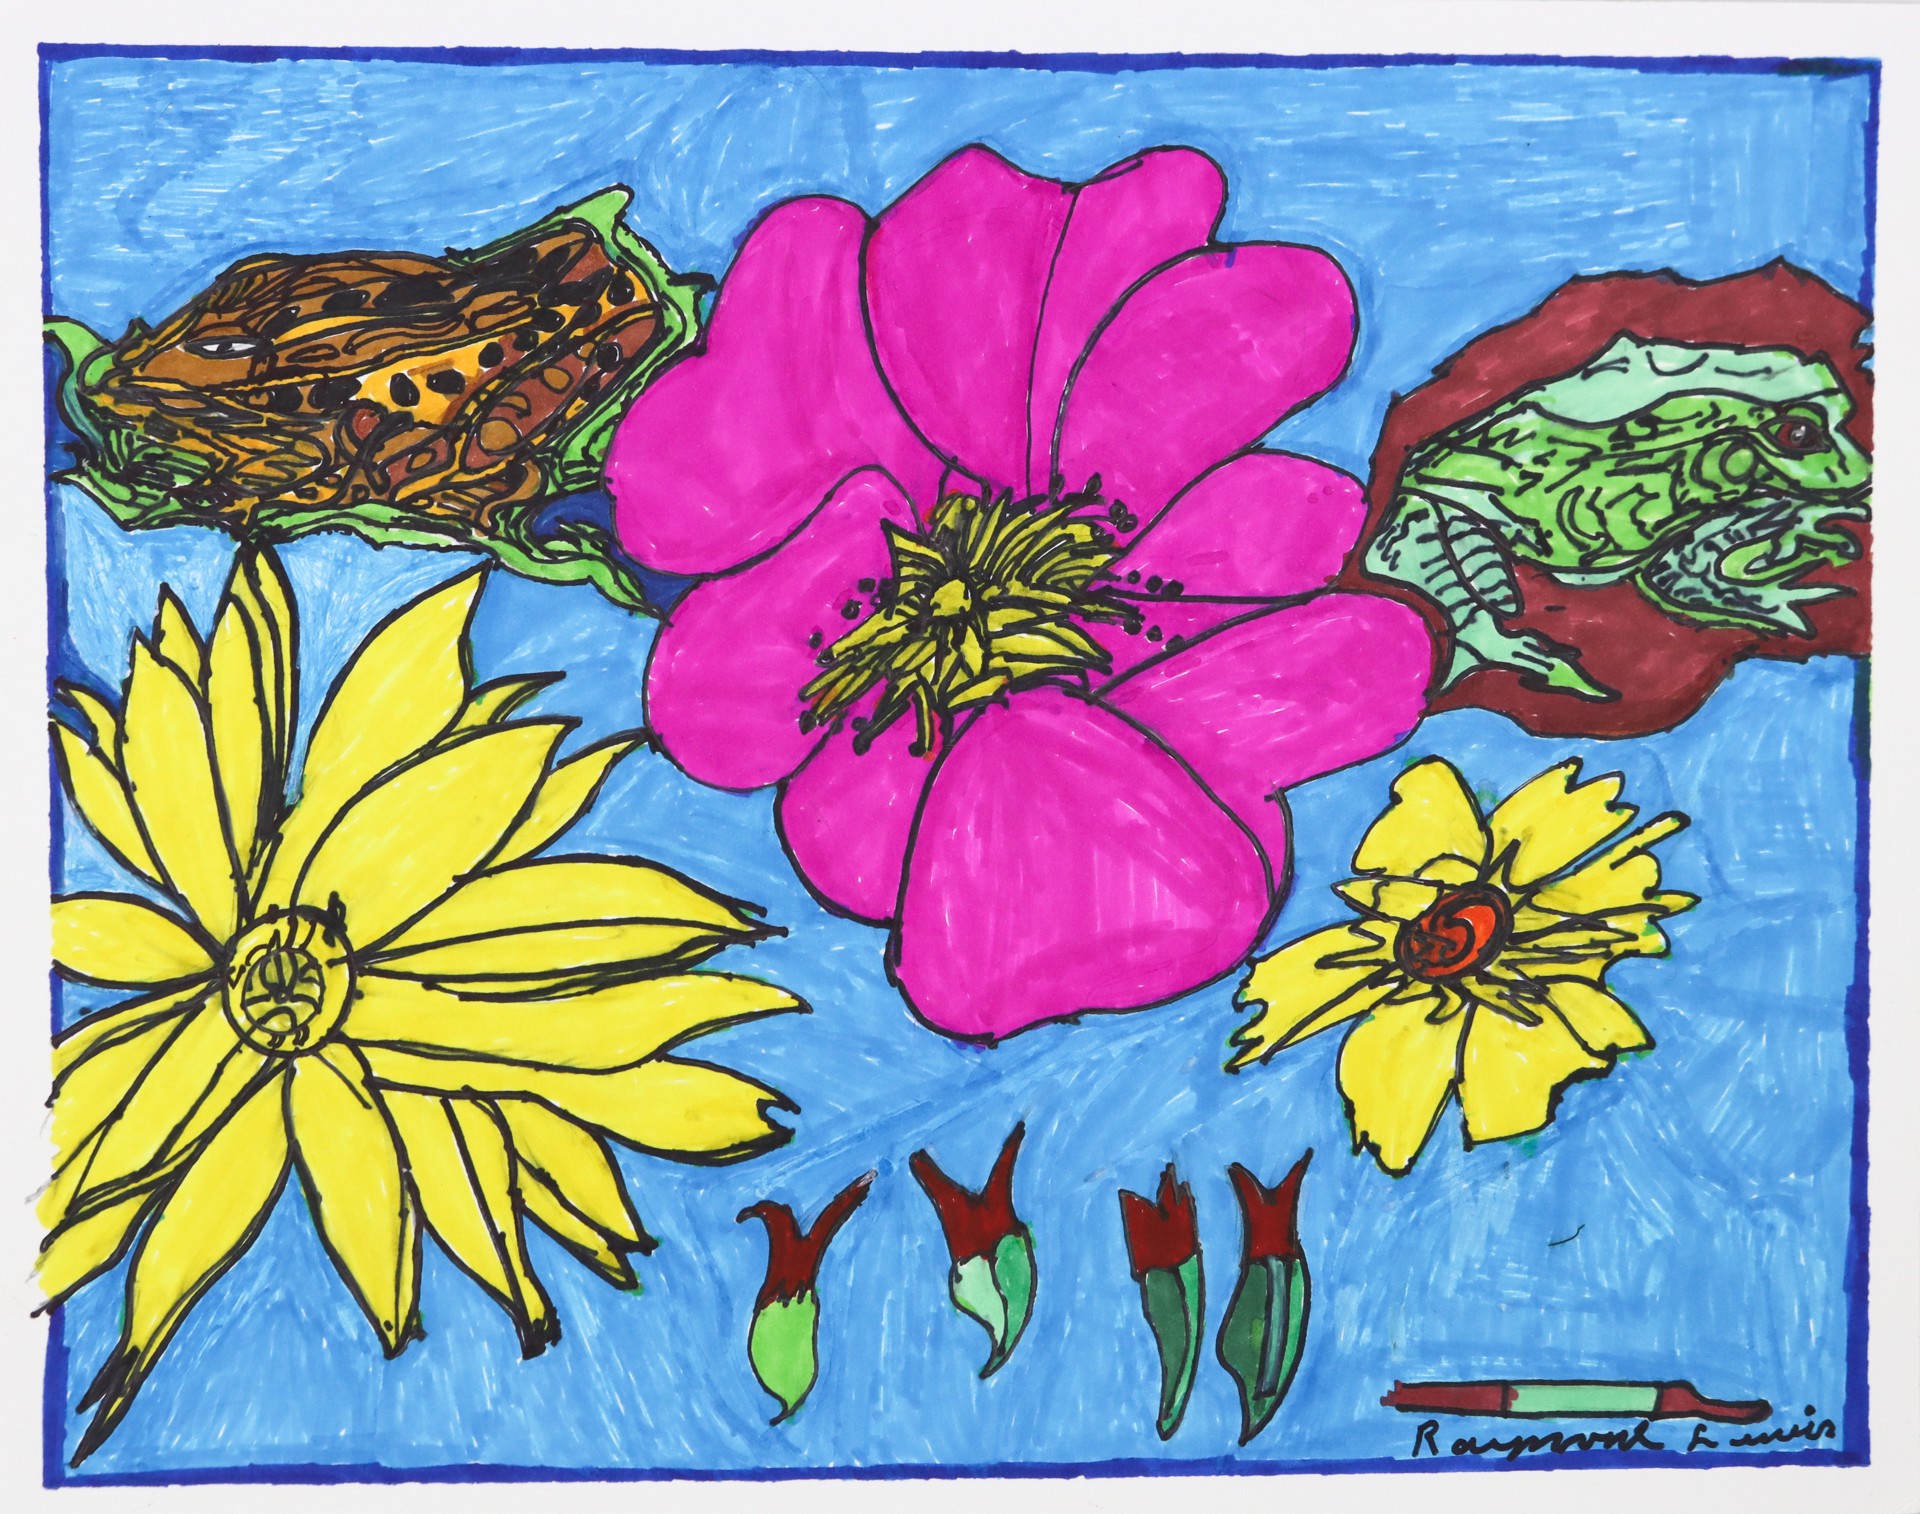 Flowers and Frogs by Raymond Lewis